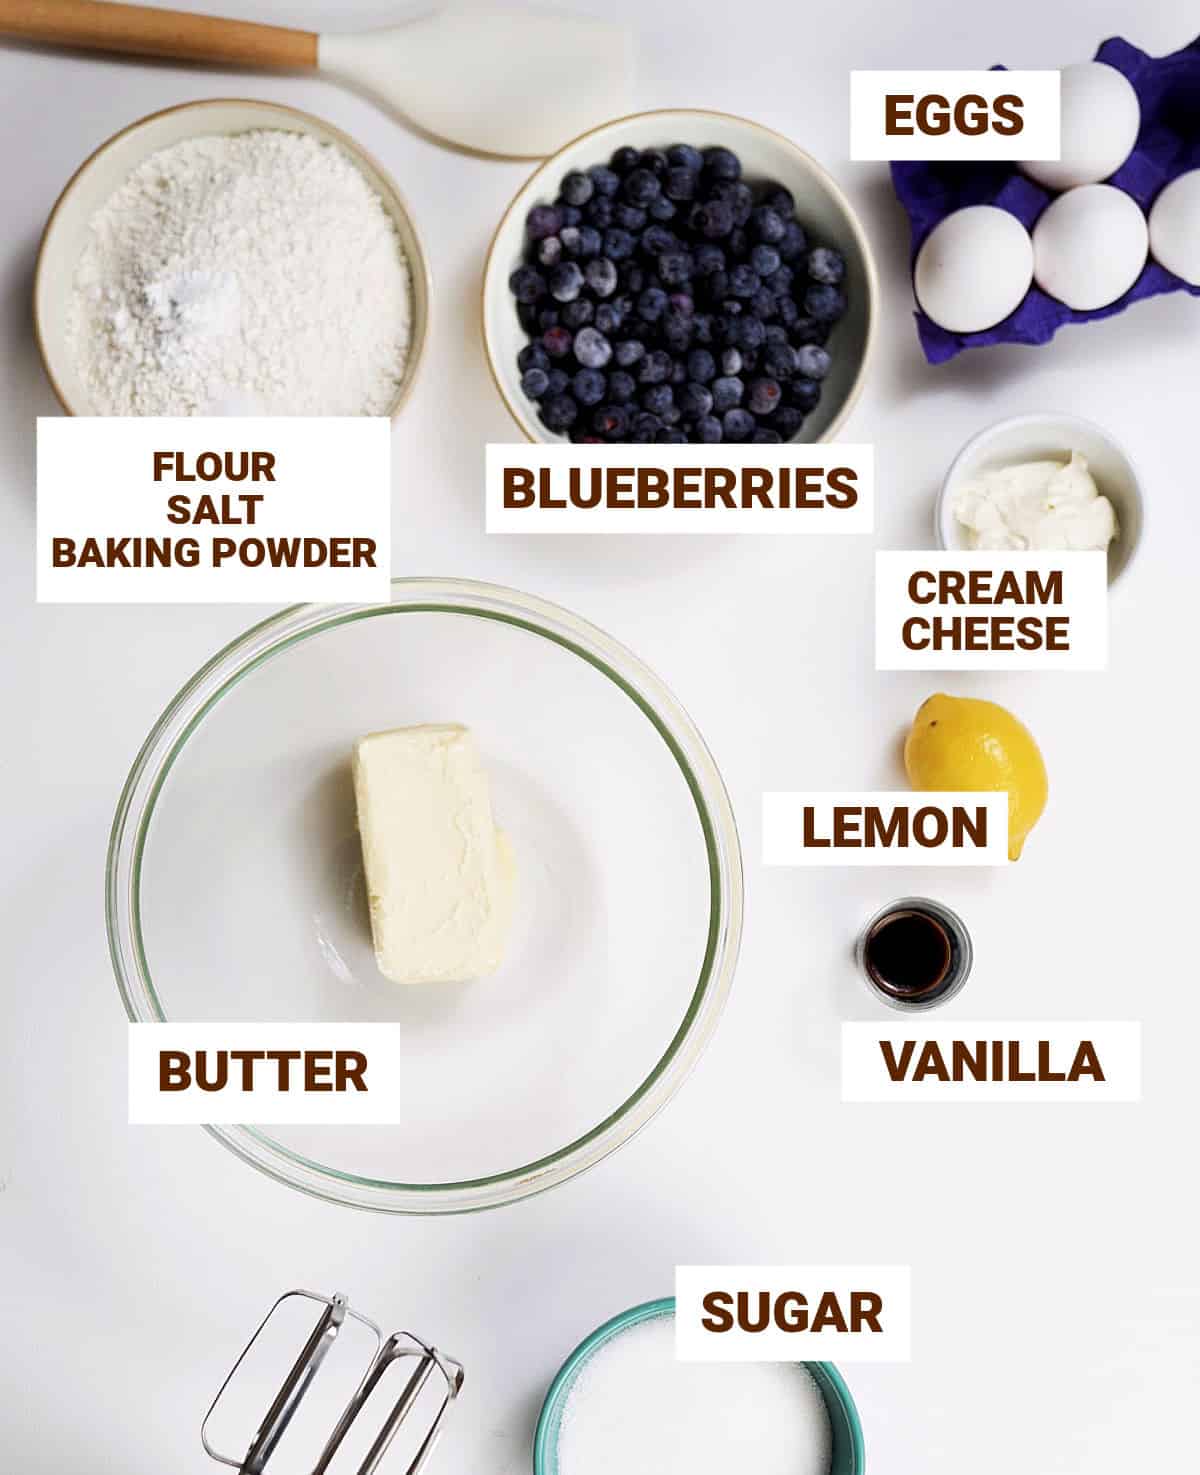 White surface with bowls containing lemon blueberry cake ingredients including butter, vanilla, flour mixture, sugar.